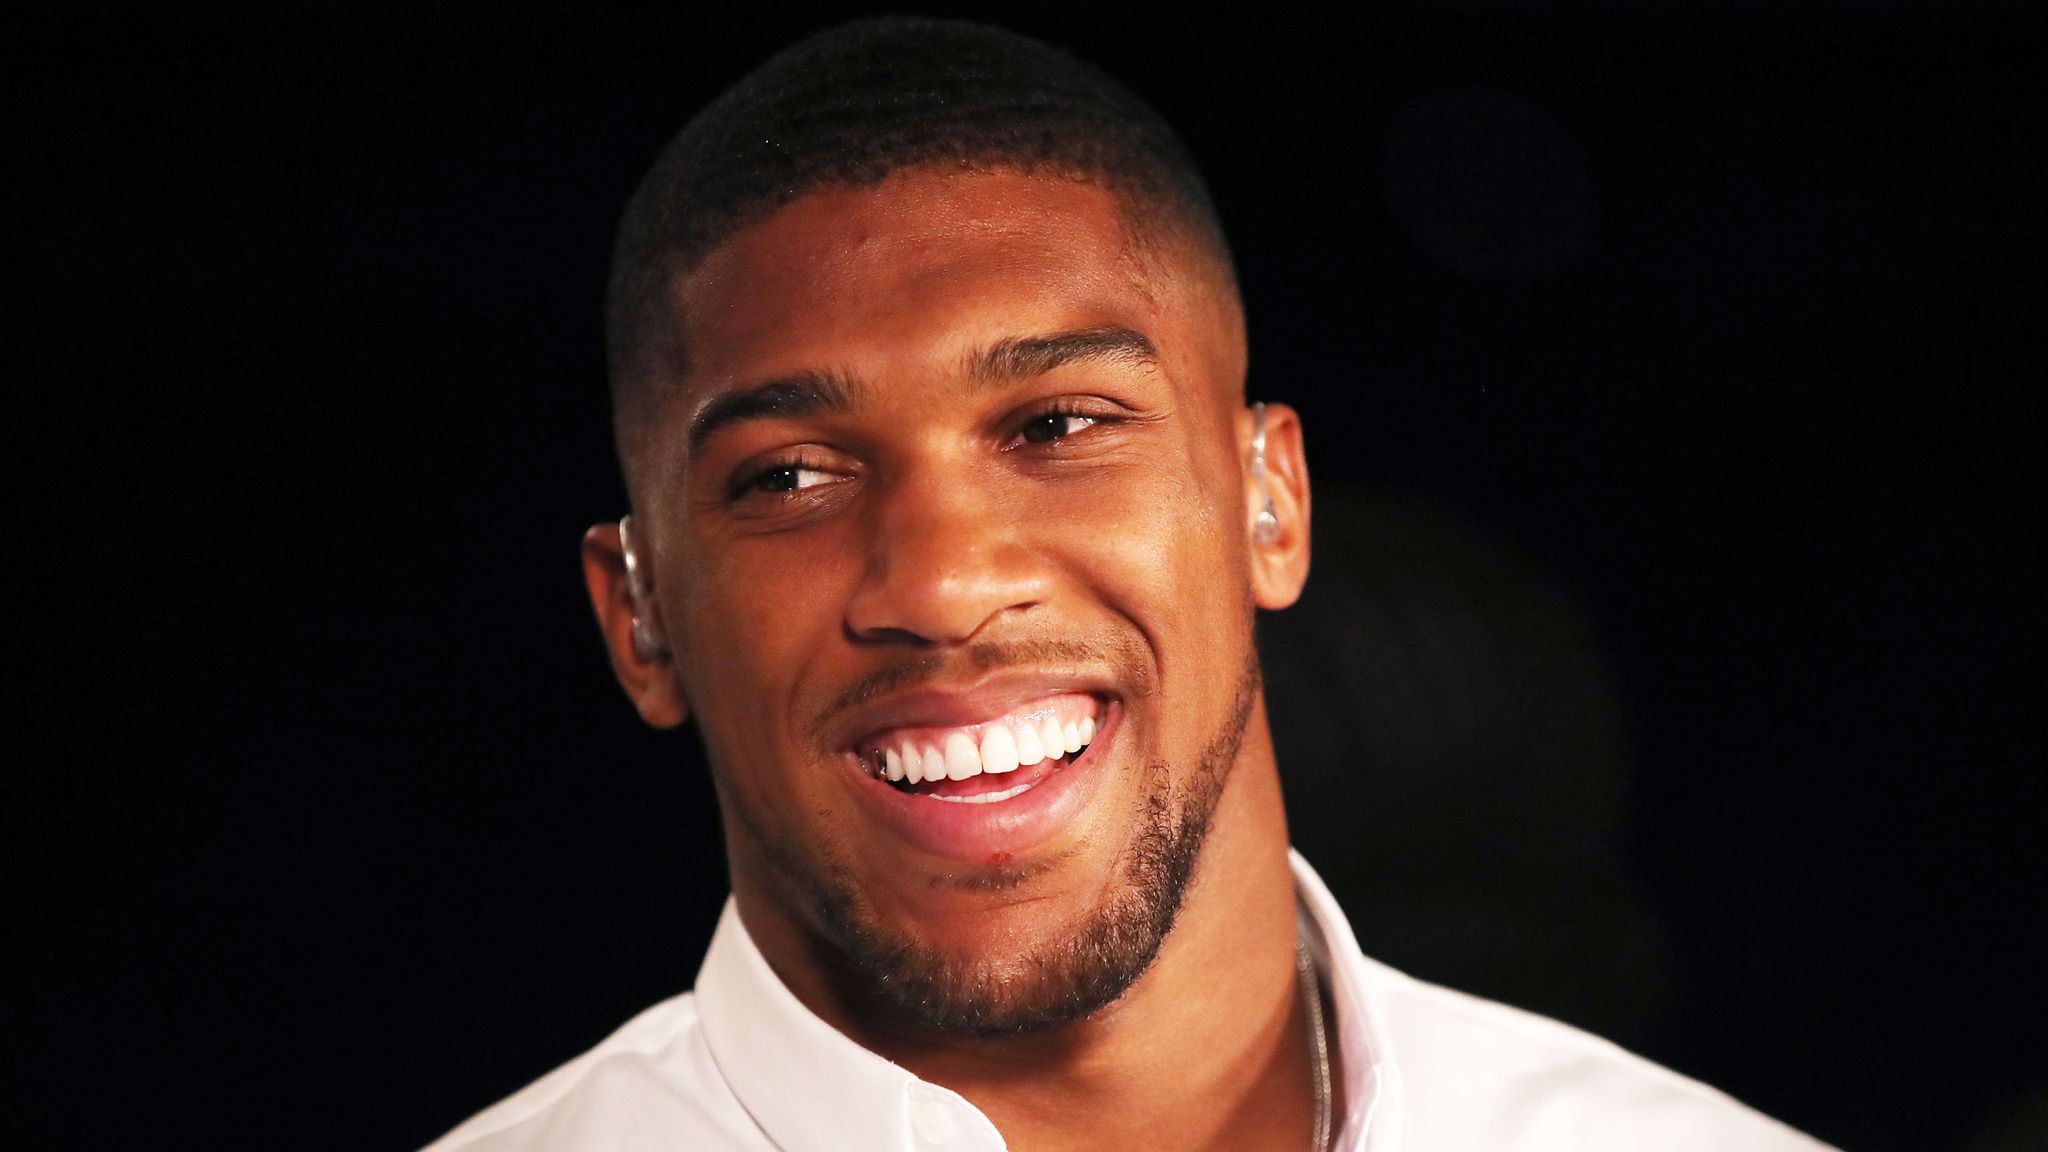 Anthony Joshua receives OBE in Queen's Birthday Honours | Boxing News ...